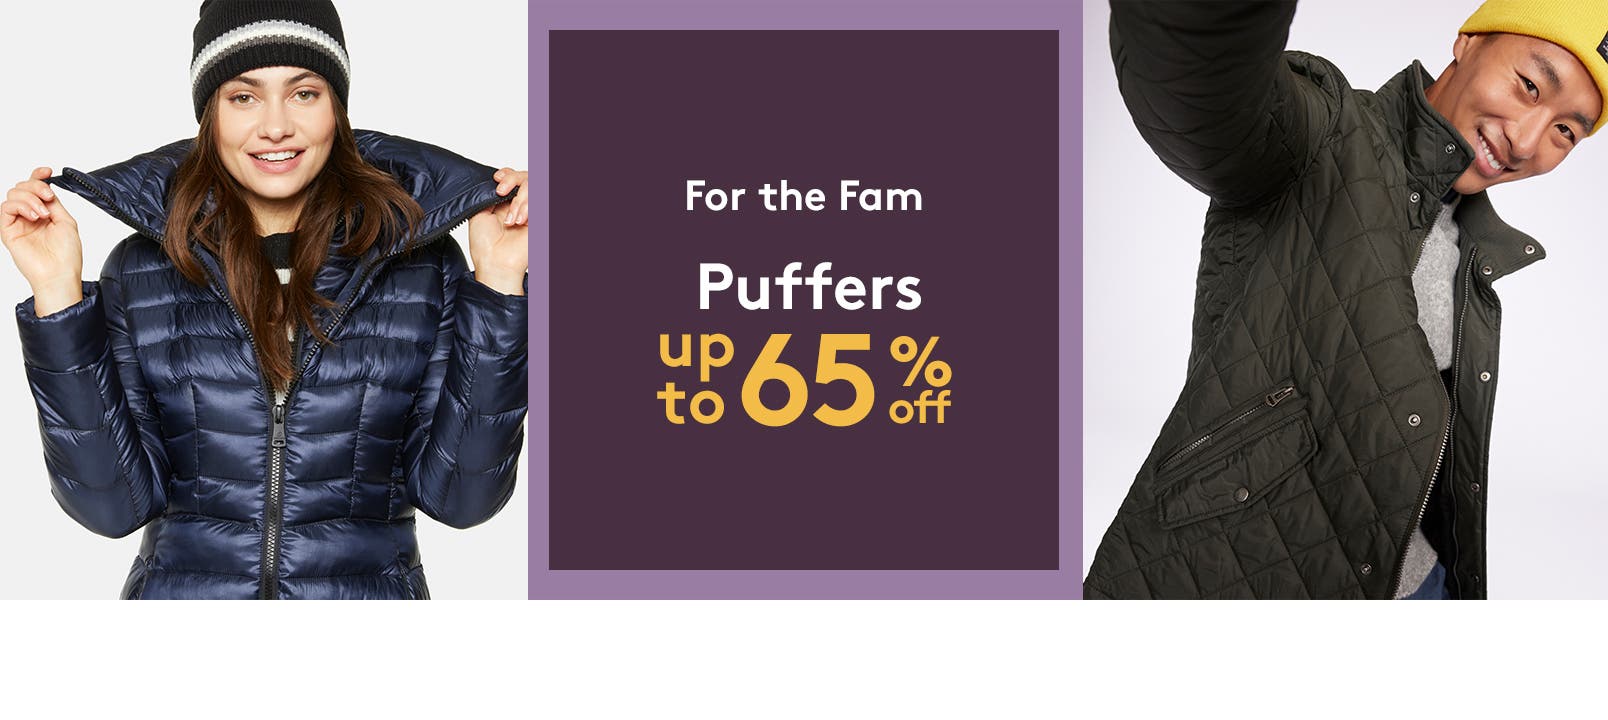 Puffers for the family.